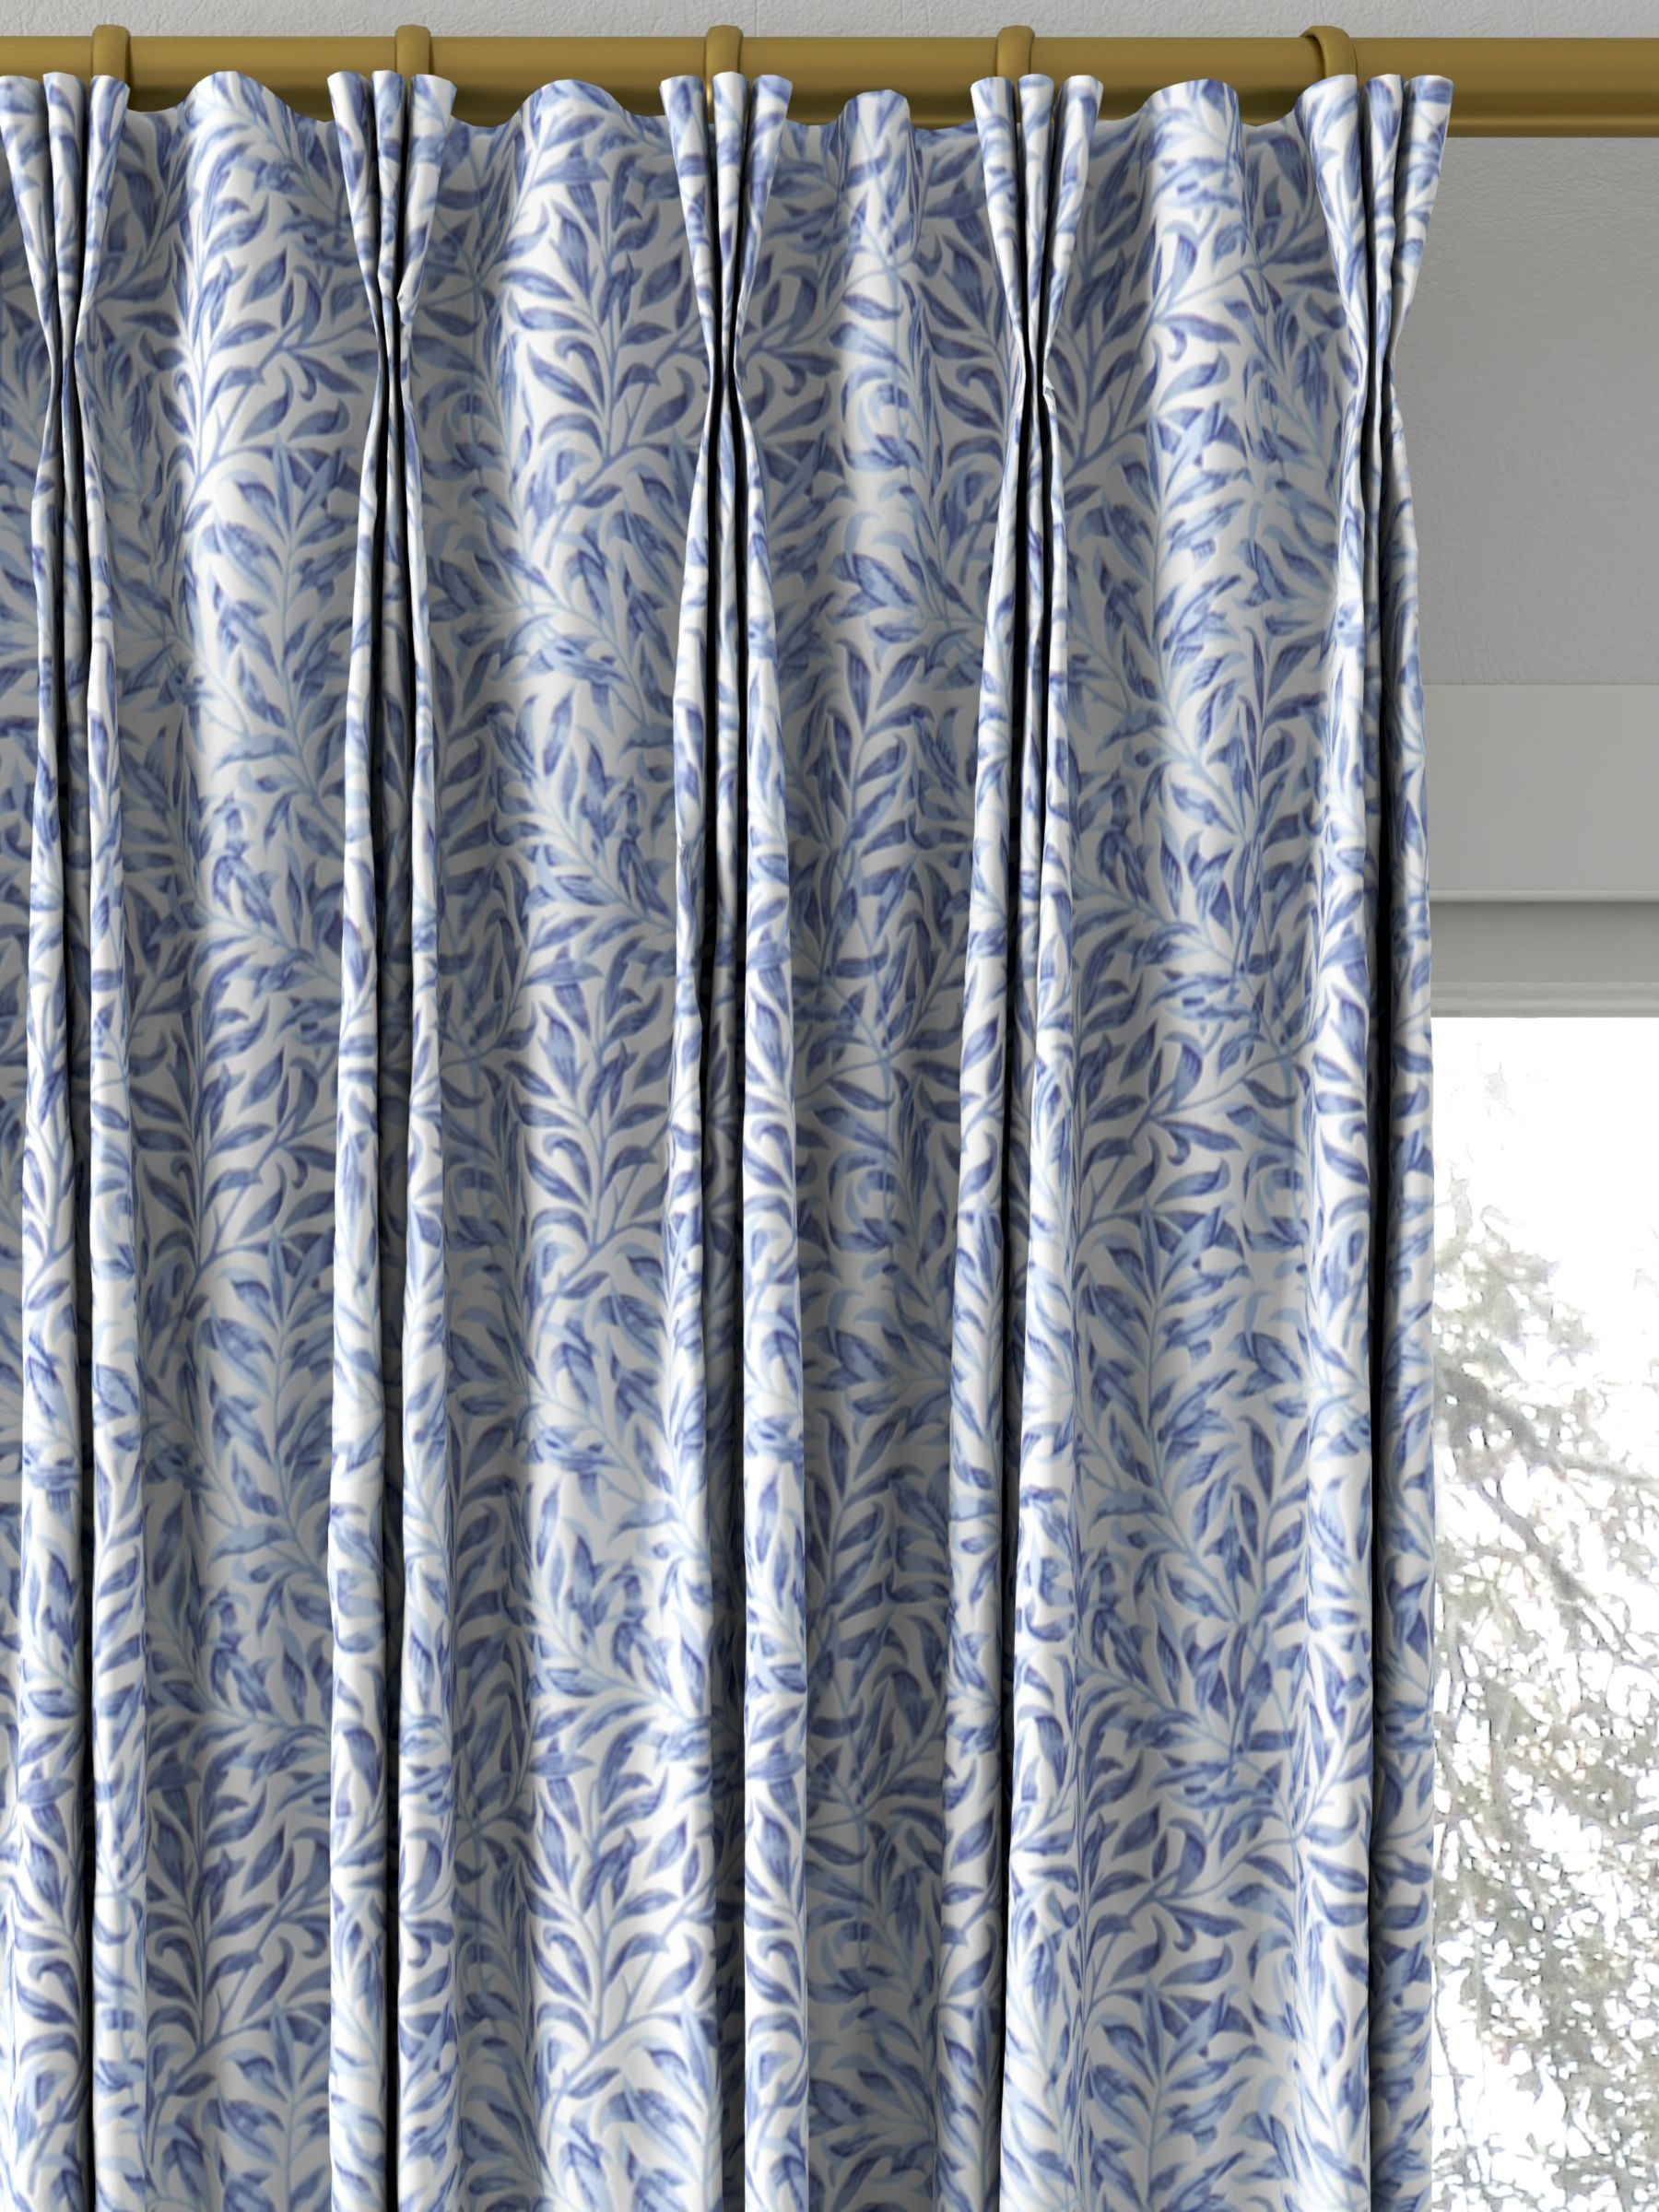 Morris & Co. Willow Boughs Minor Made to Measure Curtains, Blue